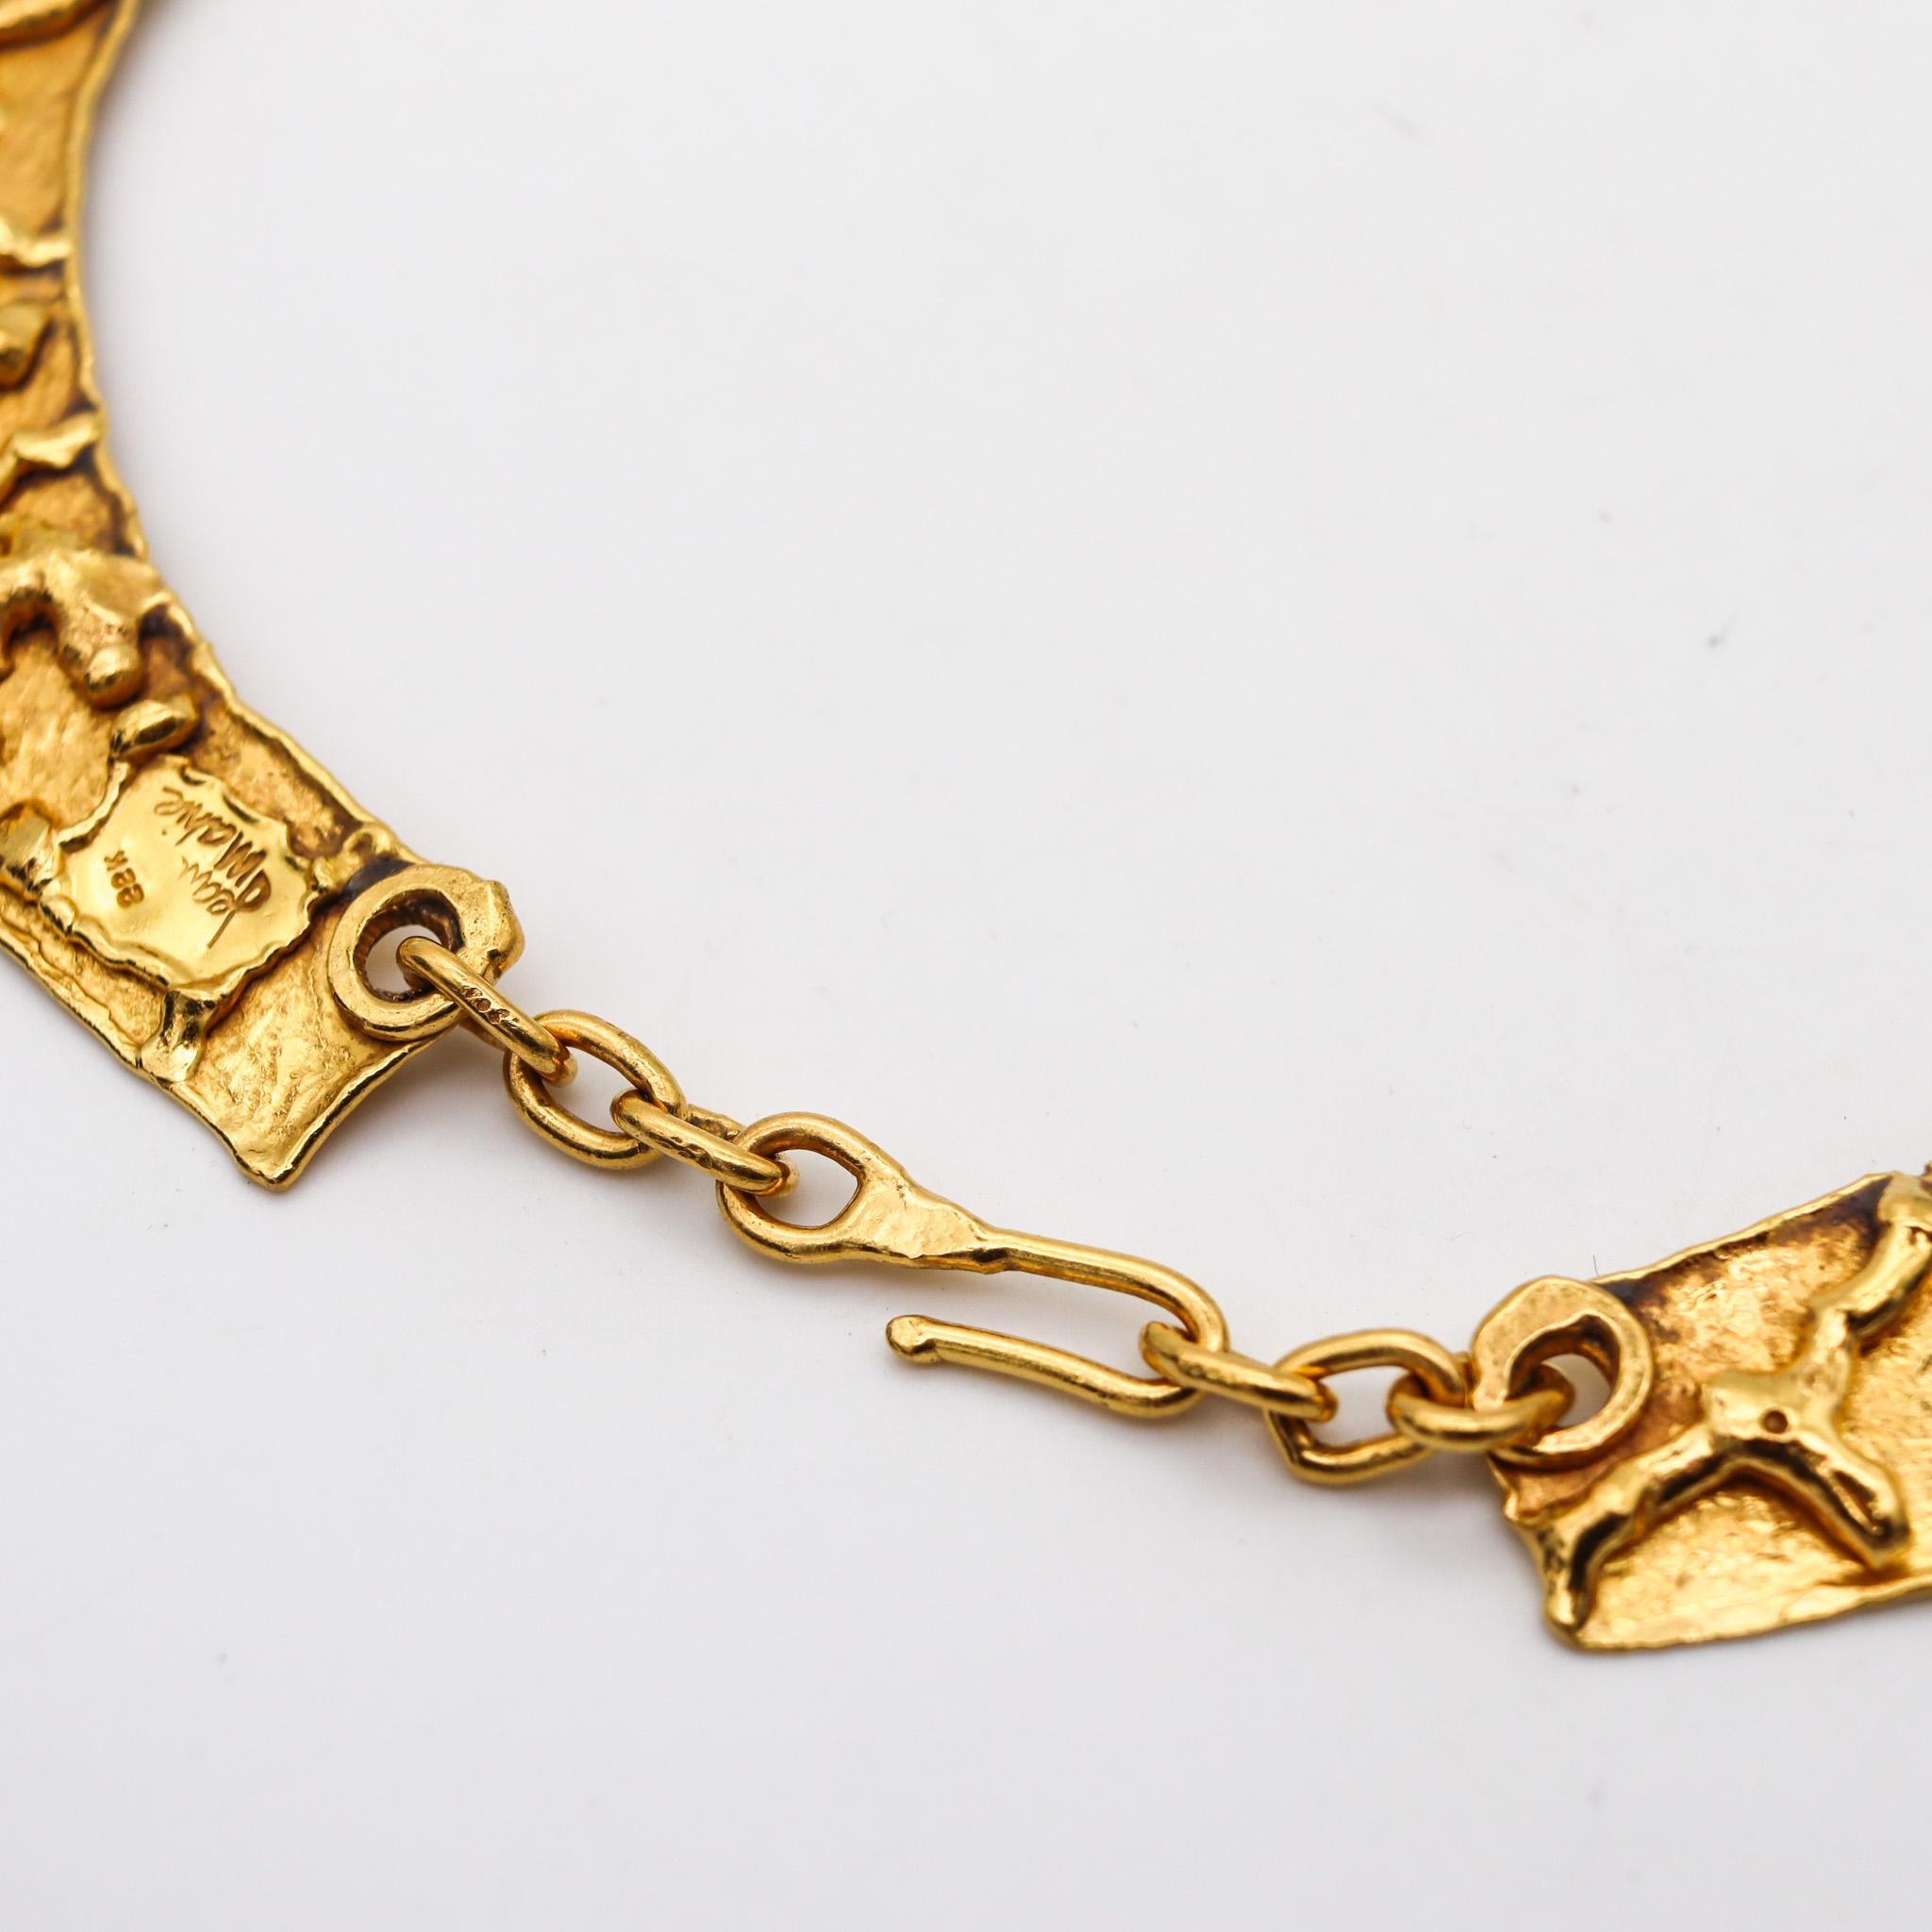 Jean Mahie 1970 Paris Sculptural Collar Necklace In Solid 22Kt Yellow Gold In Excellent Condition For Sale In Miami, FL